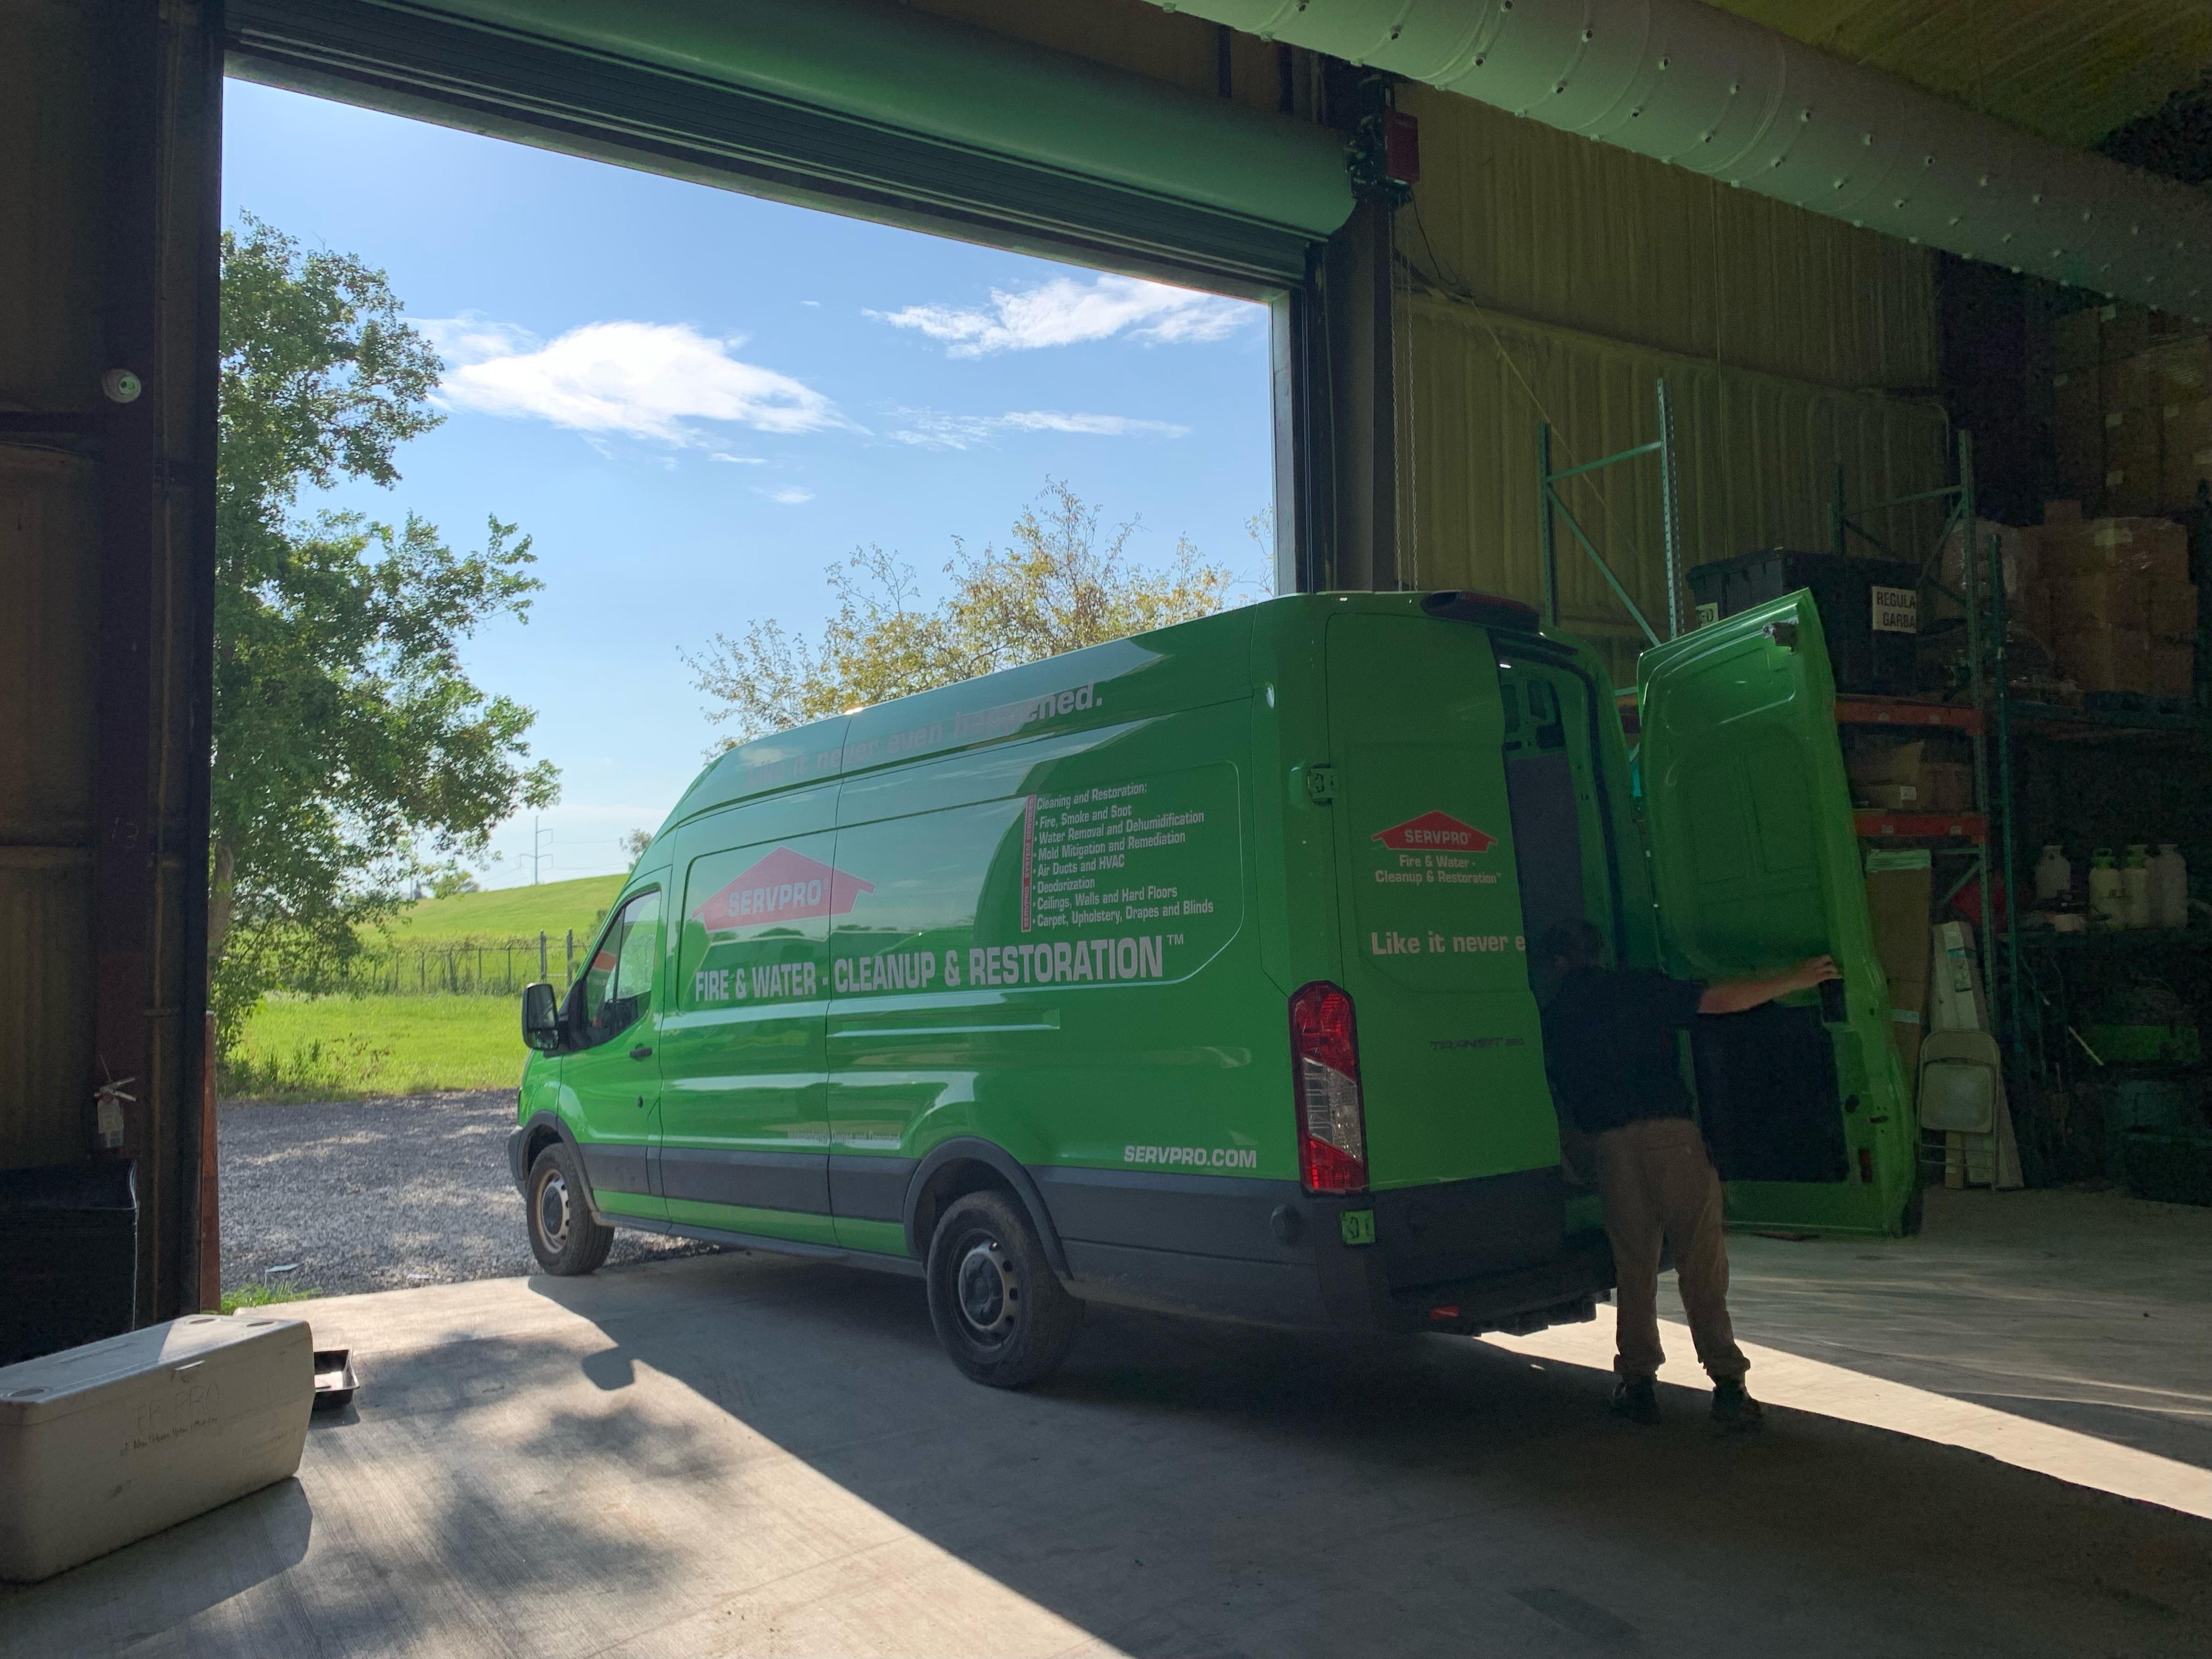 A SERVPRO crew member loading up a work van and preparing to start the day.